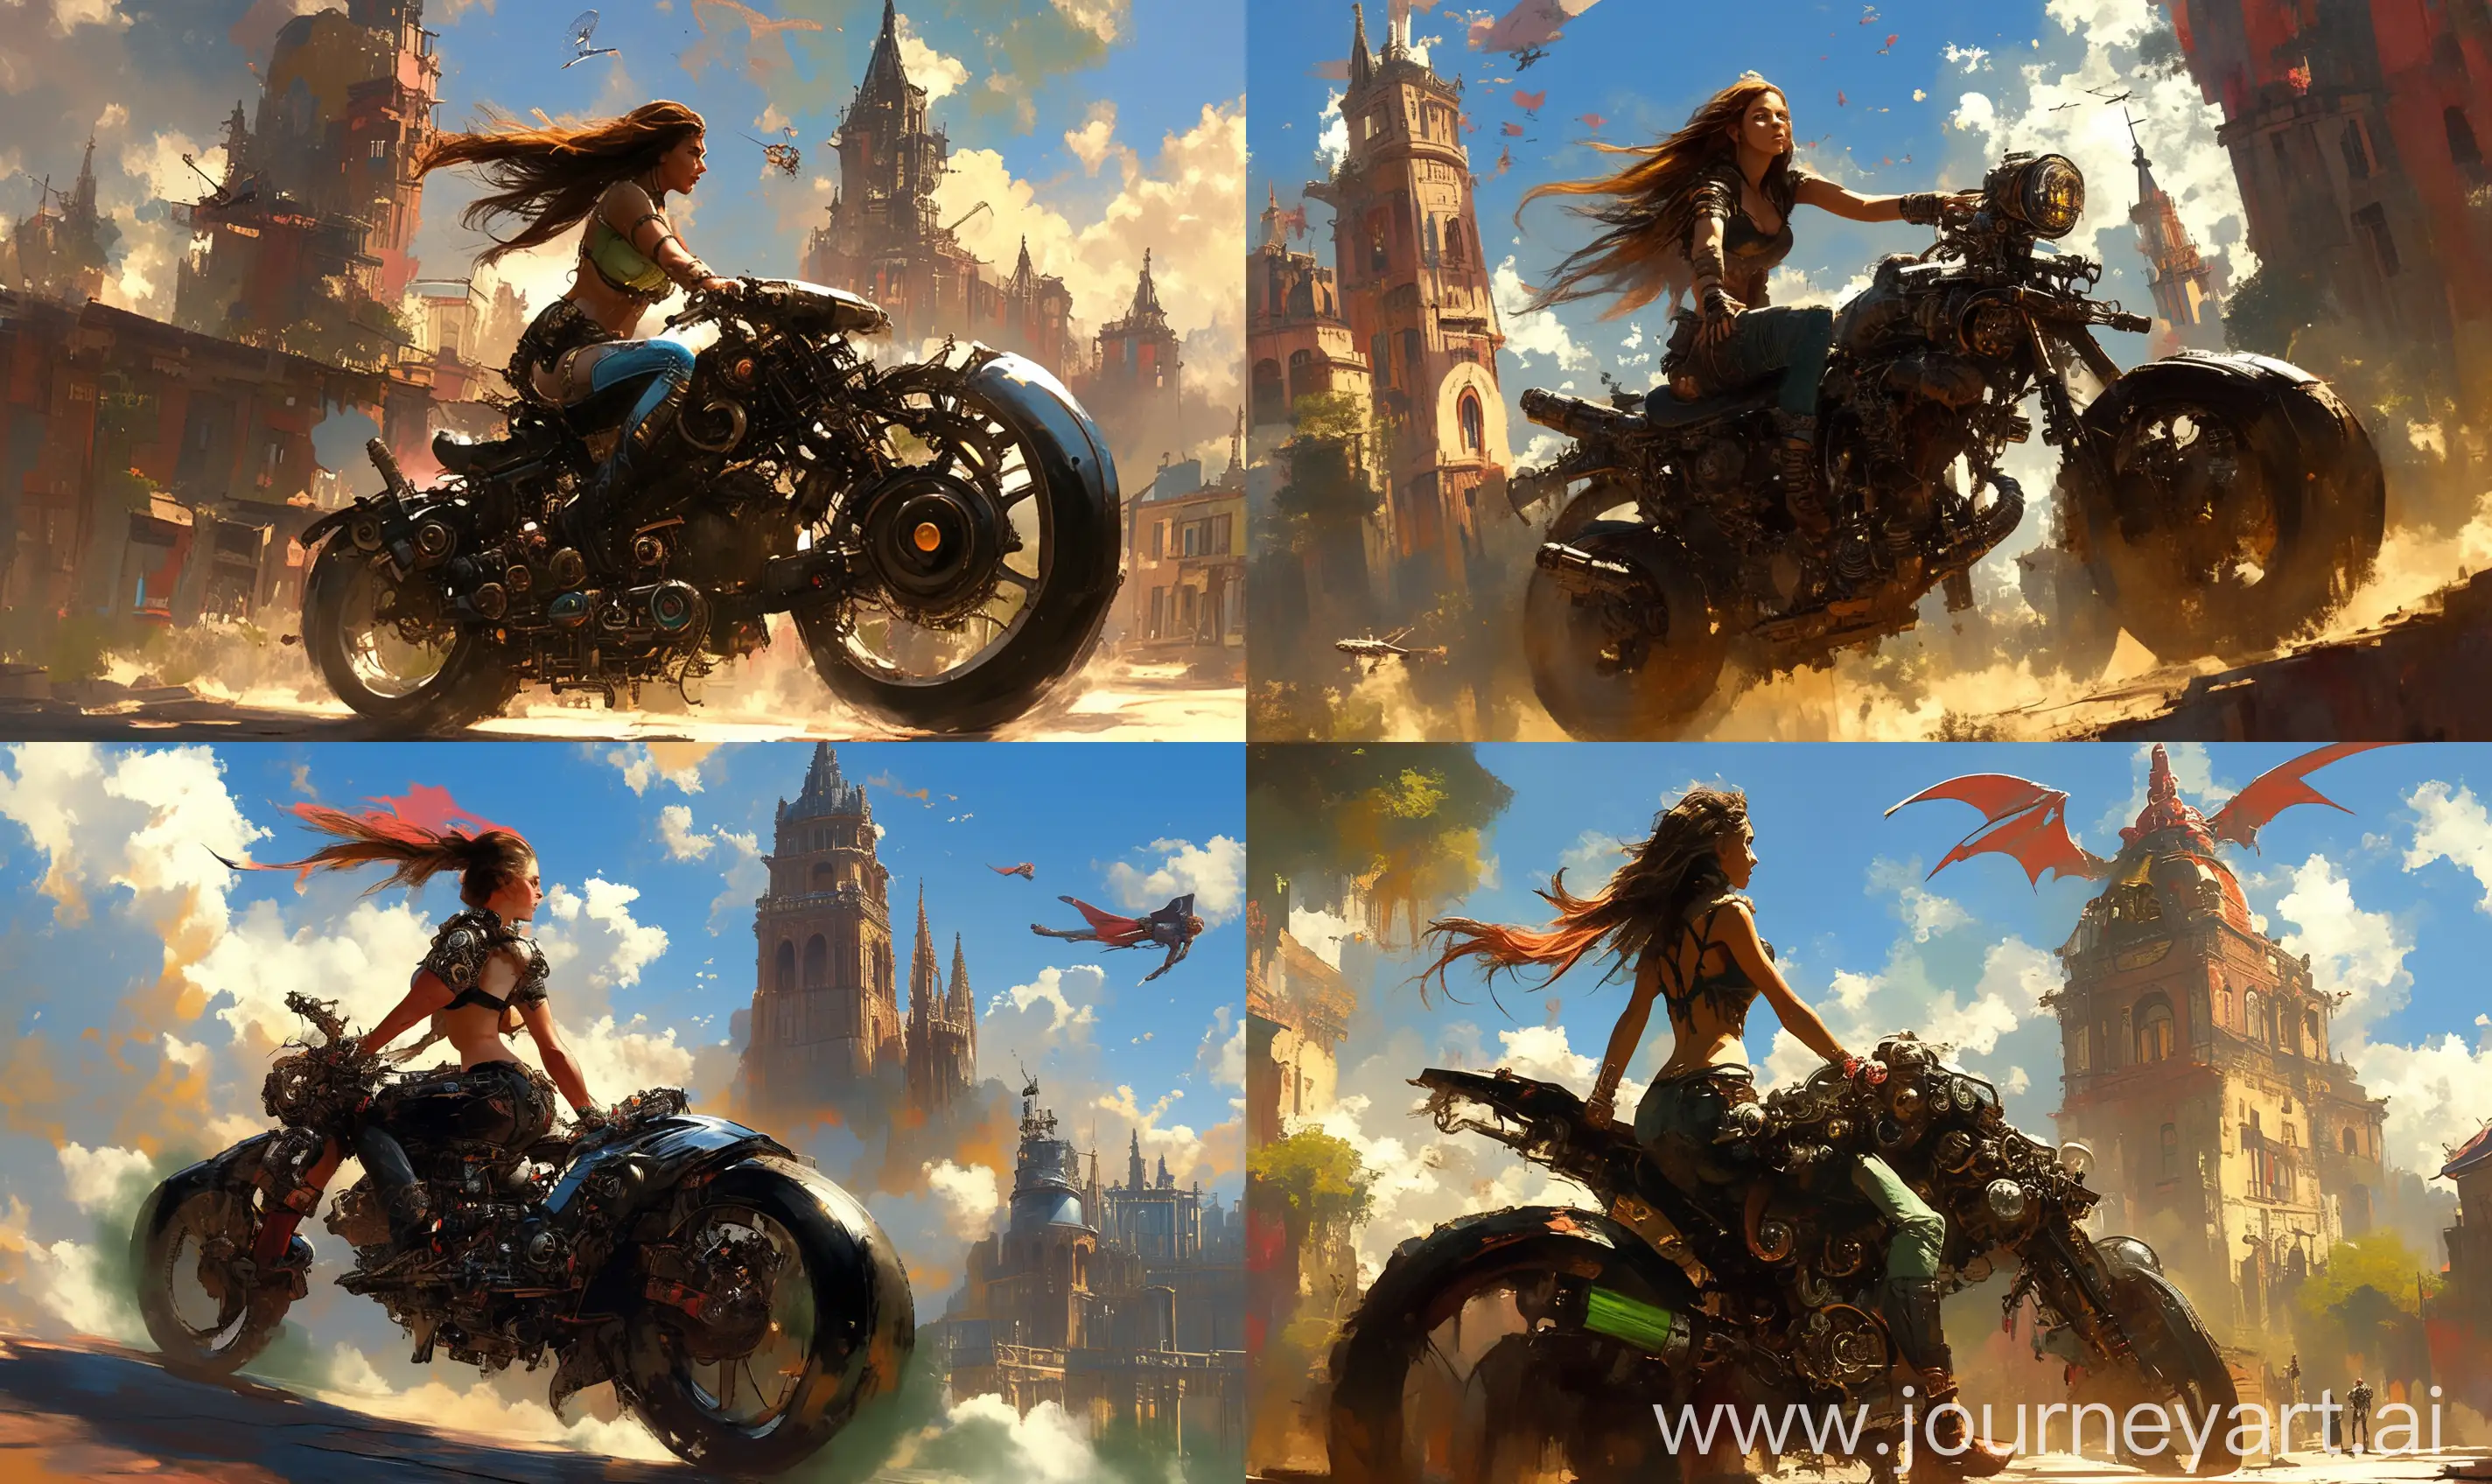 Women Amazon warrior with futuristic motorcycle in the steampunk style of the Victorian era state of street on big towers with magic mechanisms and laboratory devices, in sky flying derigibles, Luis Royo and Jim Lee style, features, ancient, highly detailed, complex, golden ratio composition, X-Men comic book cover --niji 6 --ar 27:16 --s 950 --sref random